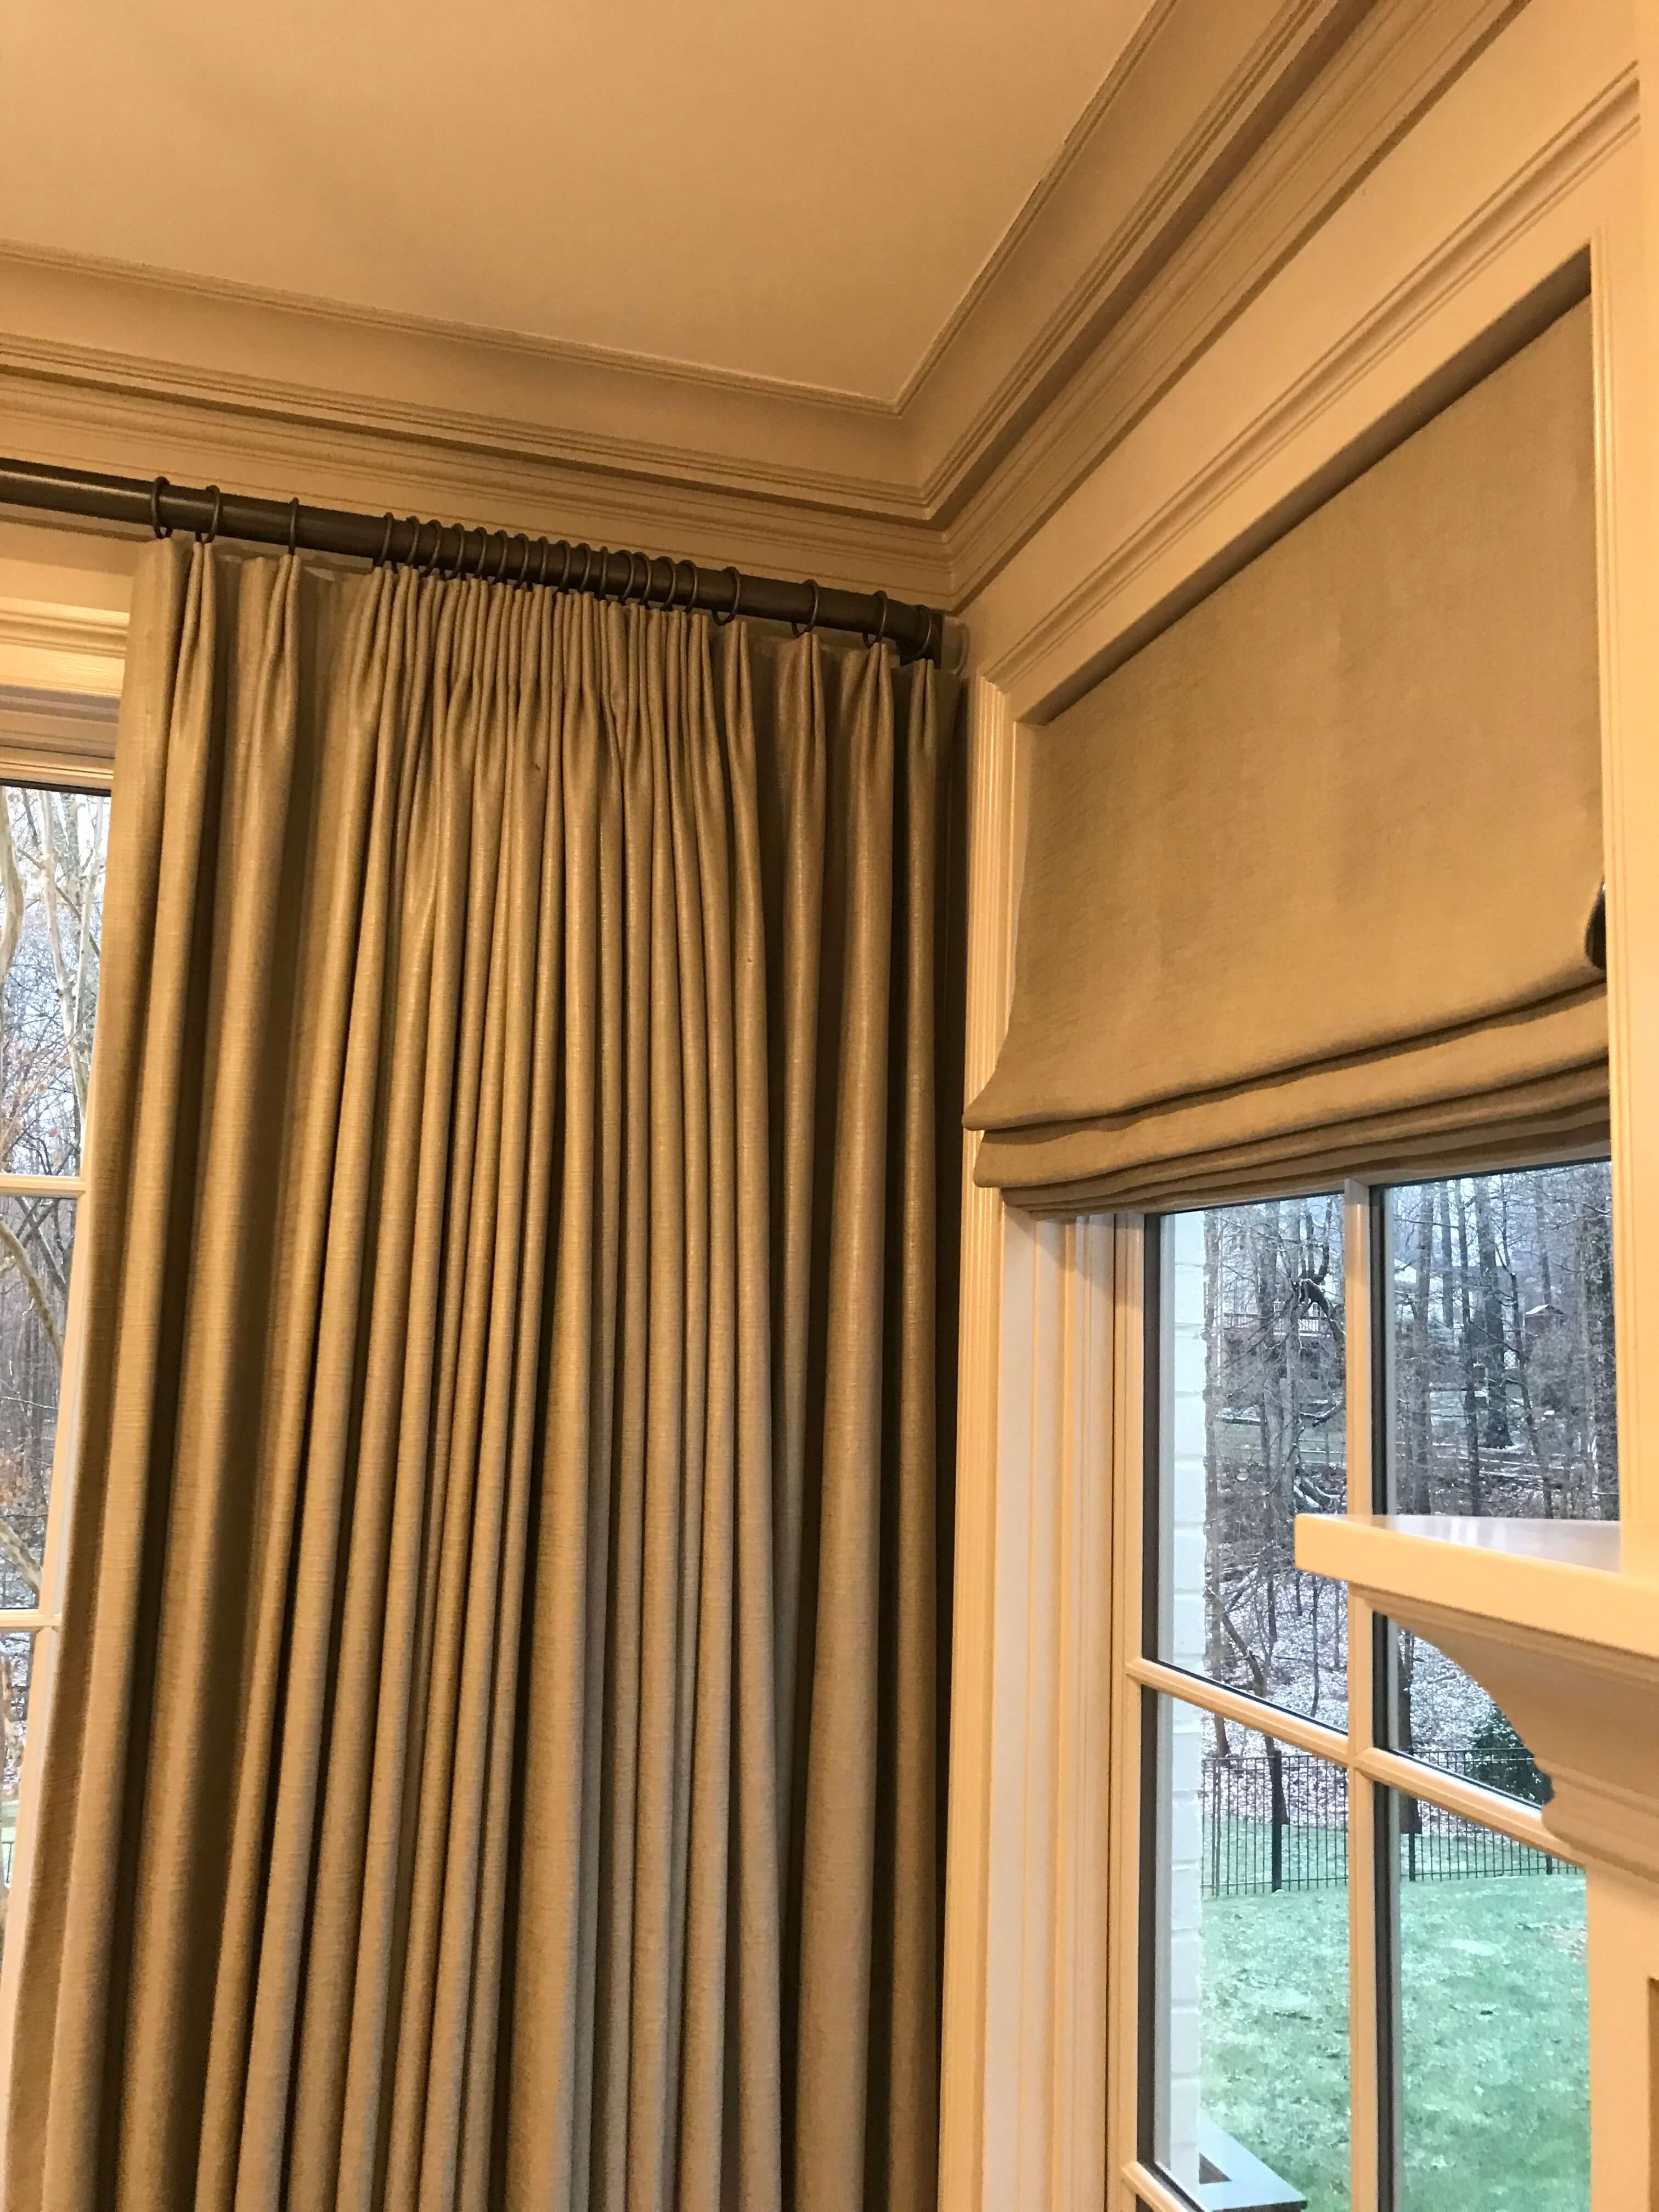 An up-close photo of two operational linen drapery panels mounted on a metal rod and a Roman shade that is mounted on a board.